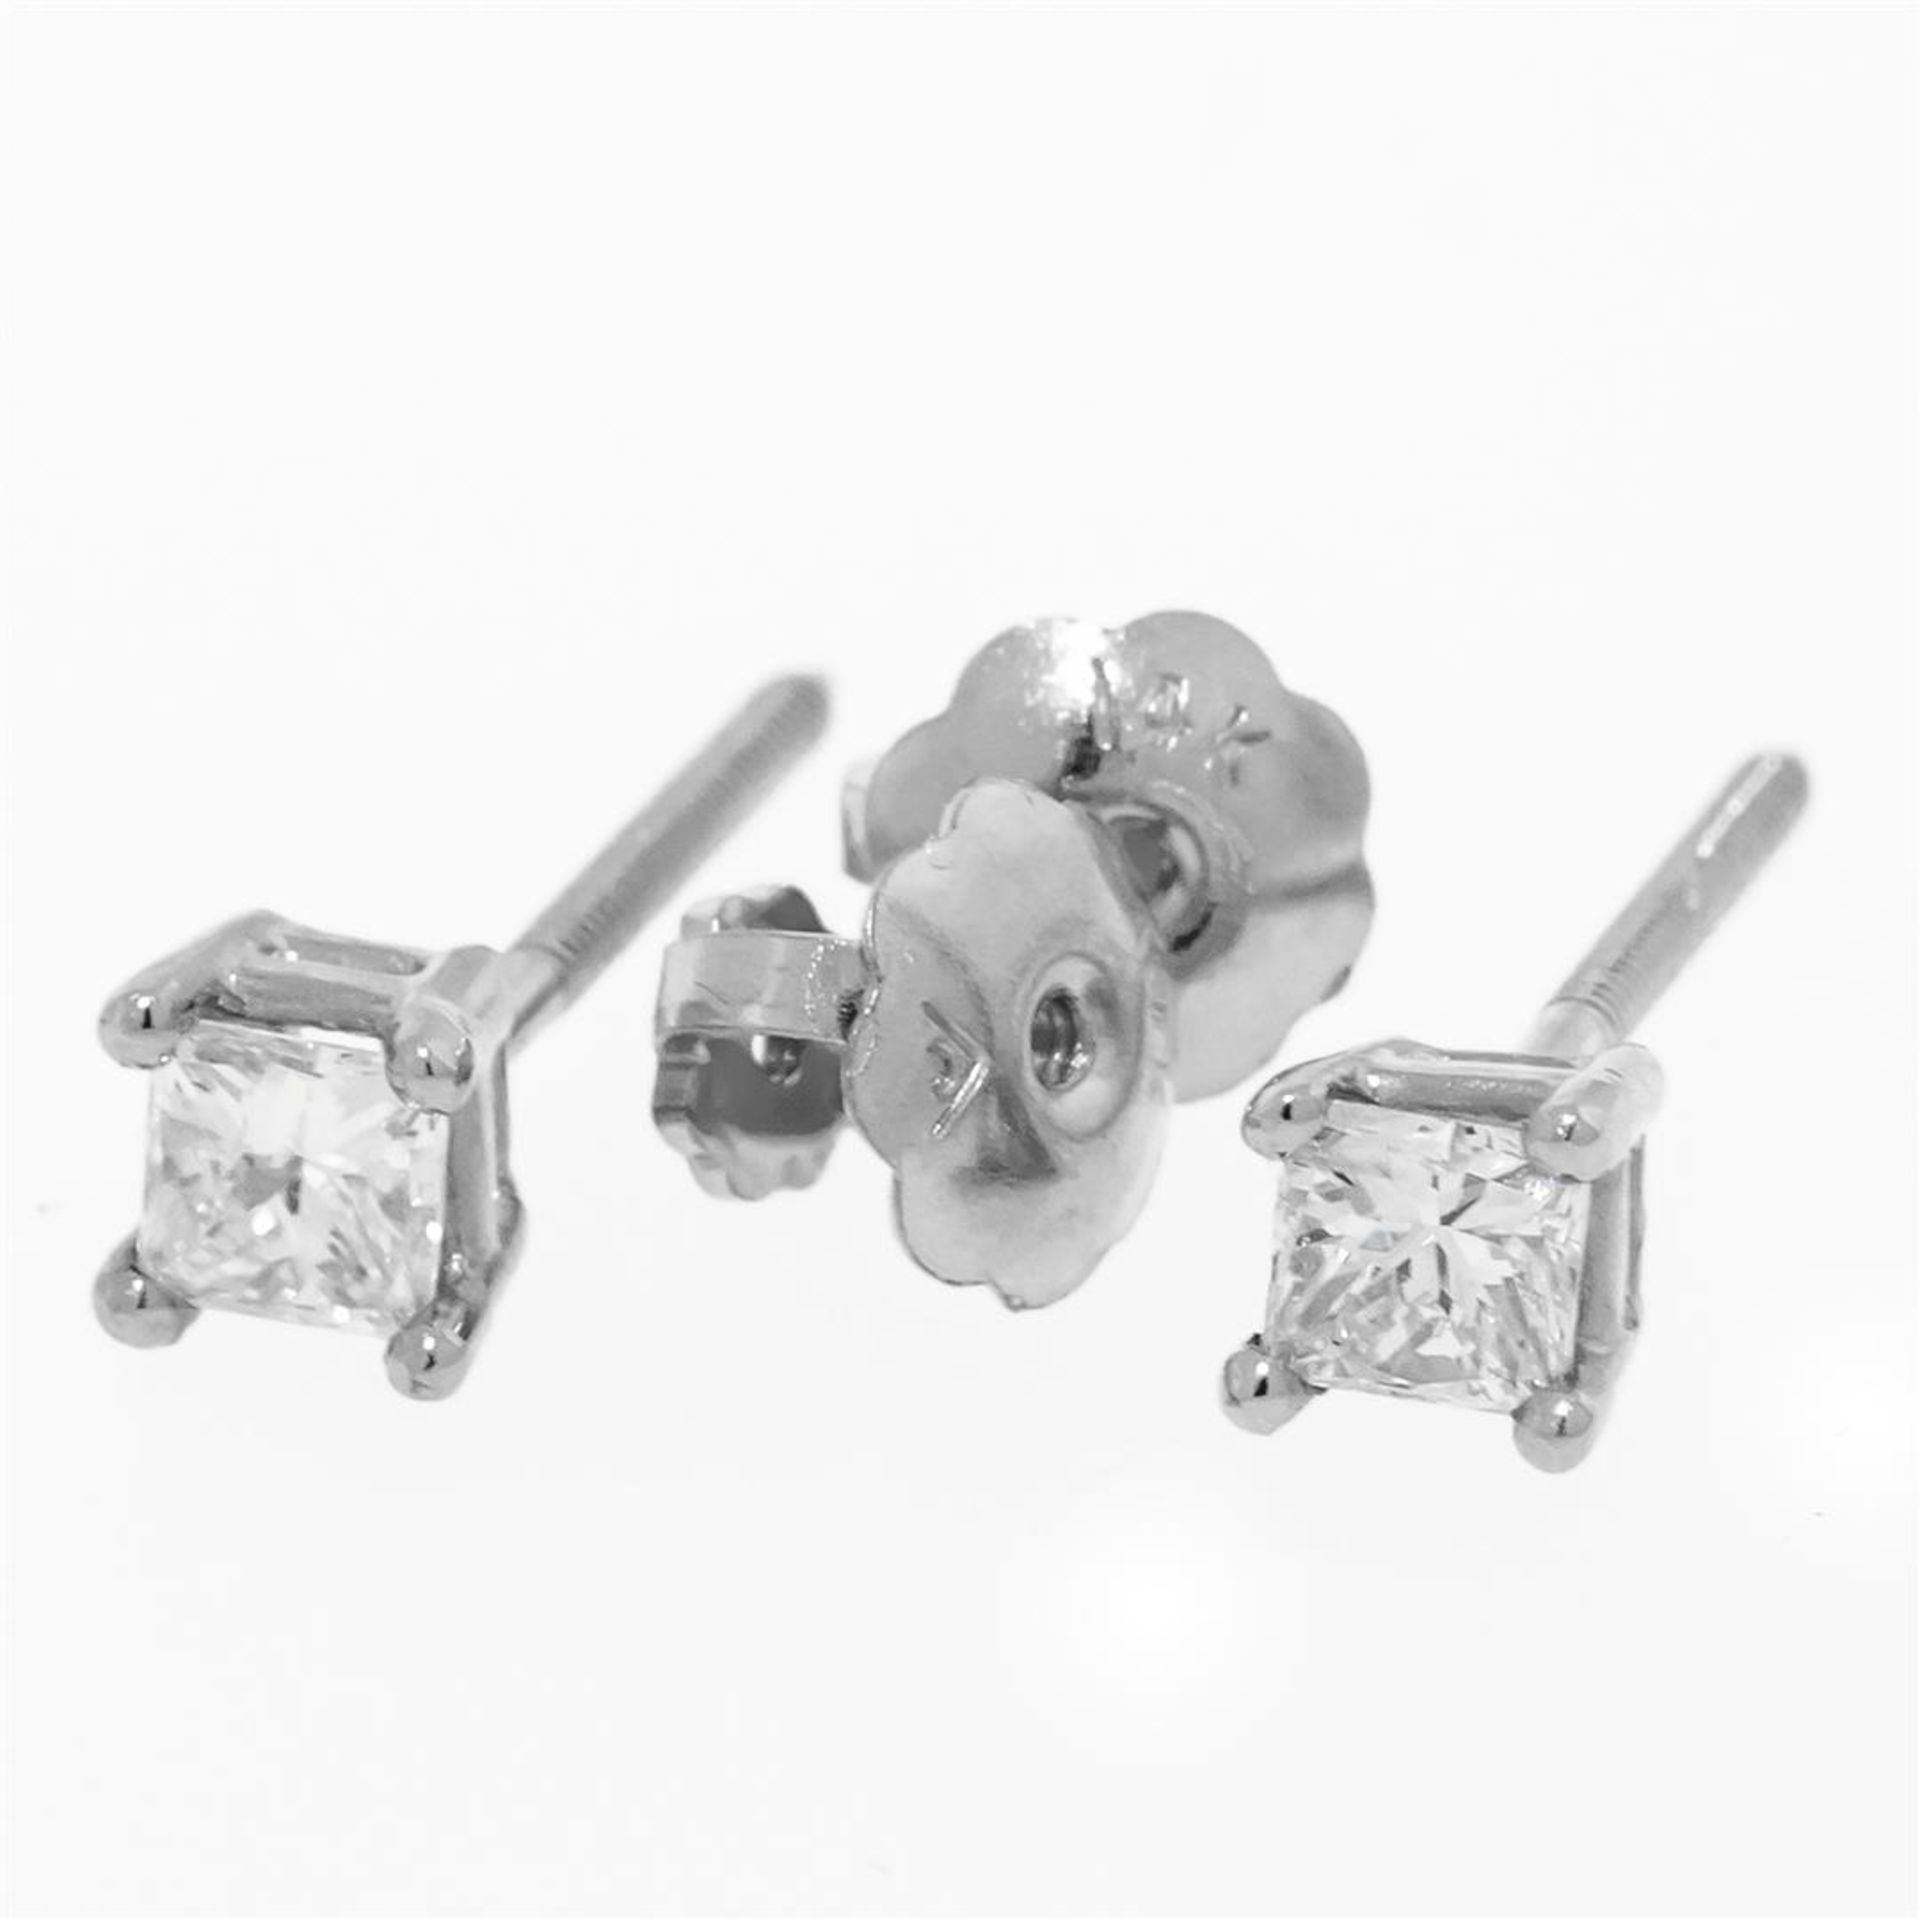 New 14K White Gold Princess Cut Solitaire Stud Earrings